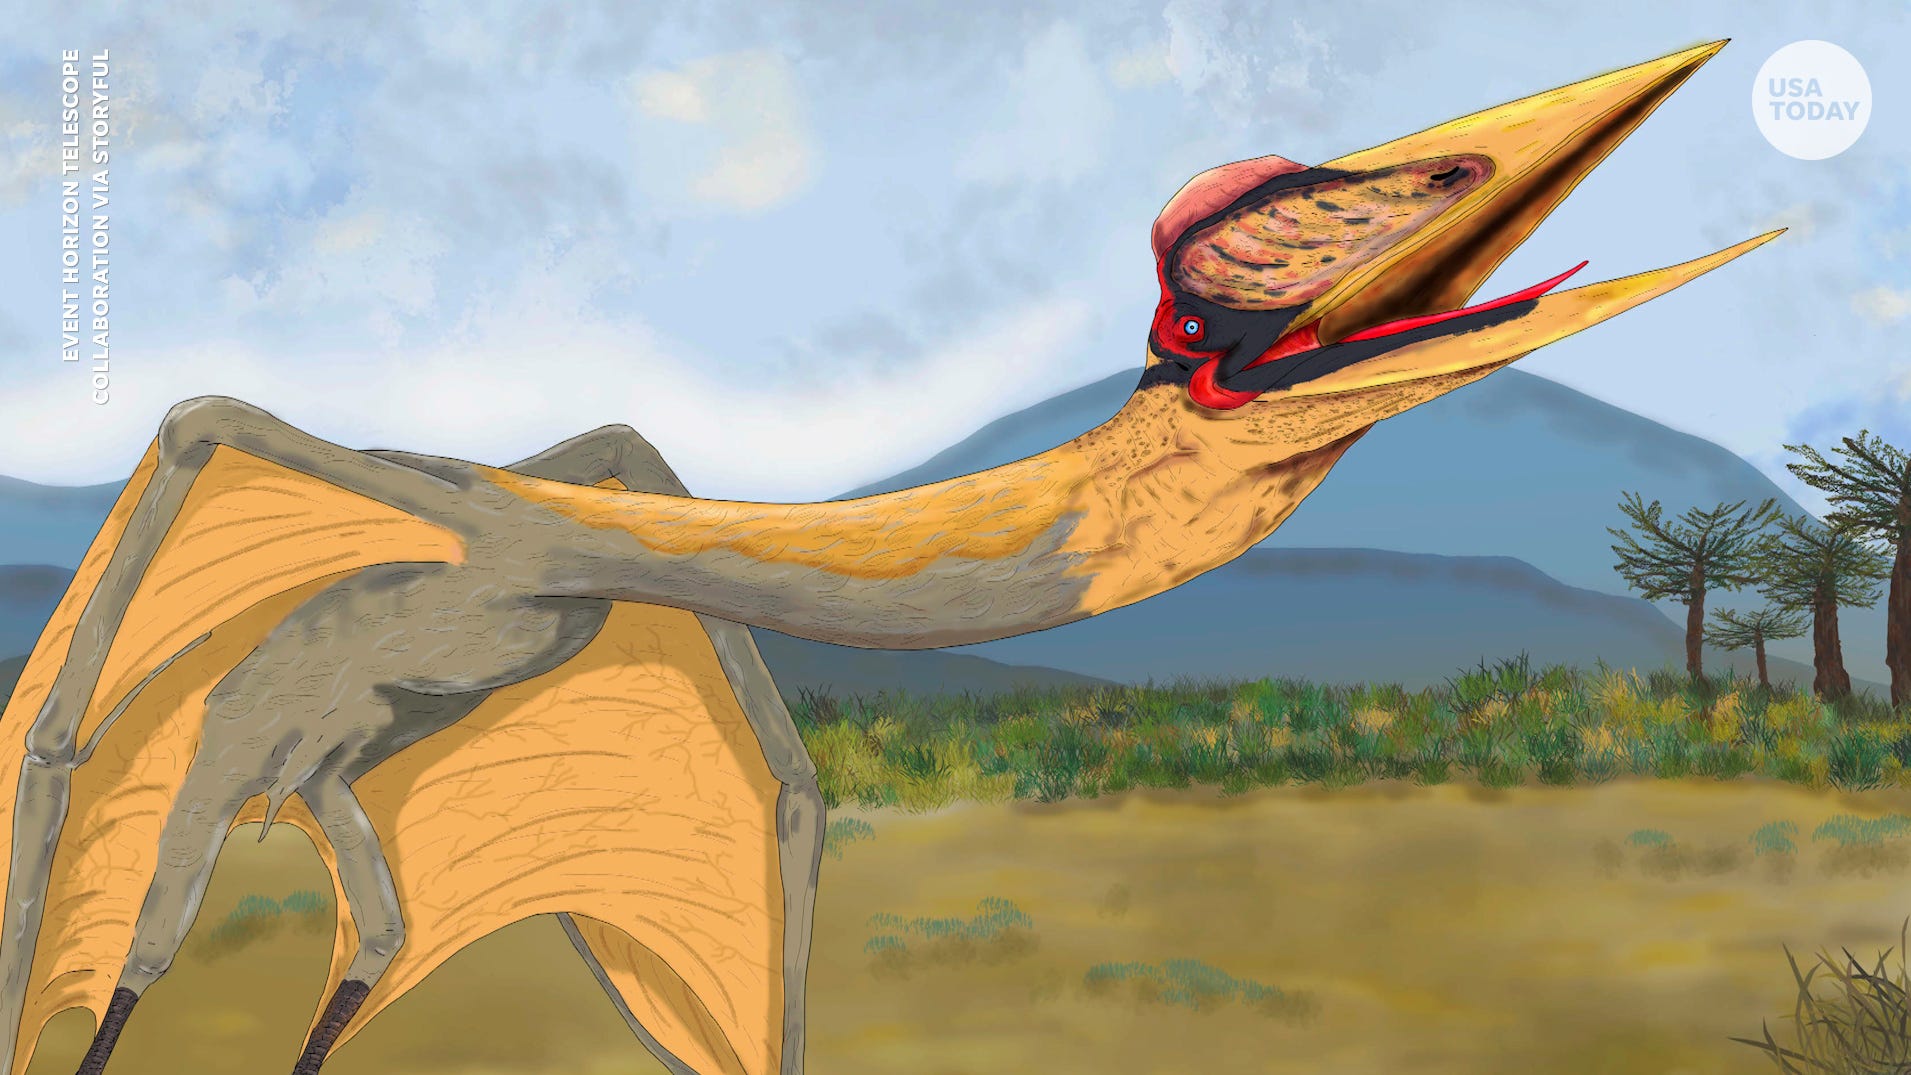 Scientists in Argentina discovered a new species of flying reptiles as long as a school bus known as "The Dragon of Death." A study published online in April 2022 detailed the findings in the scientific journal Cretaceous Research.